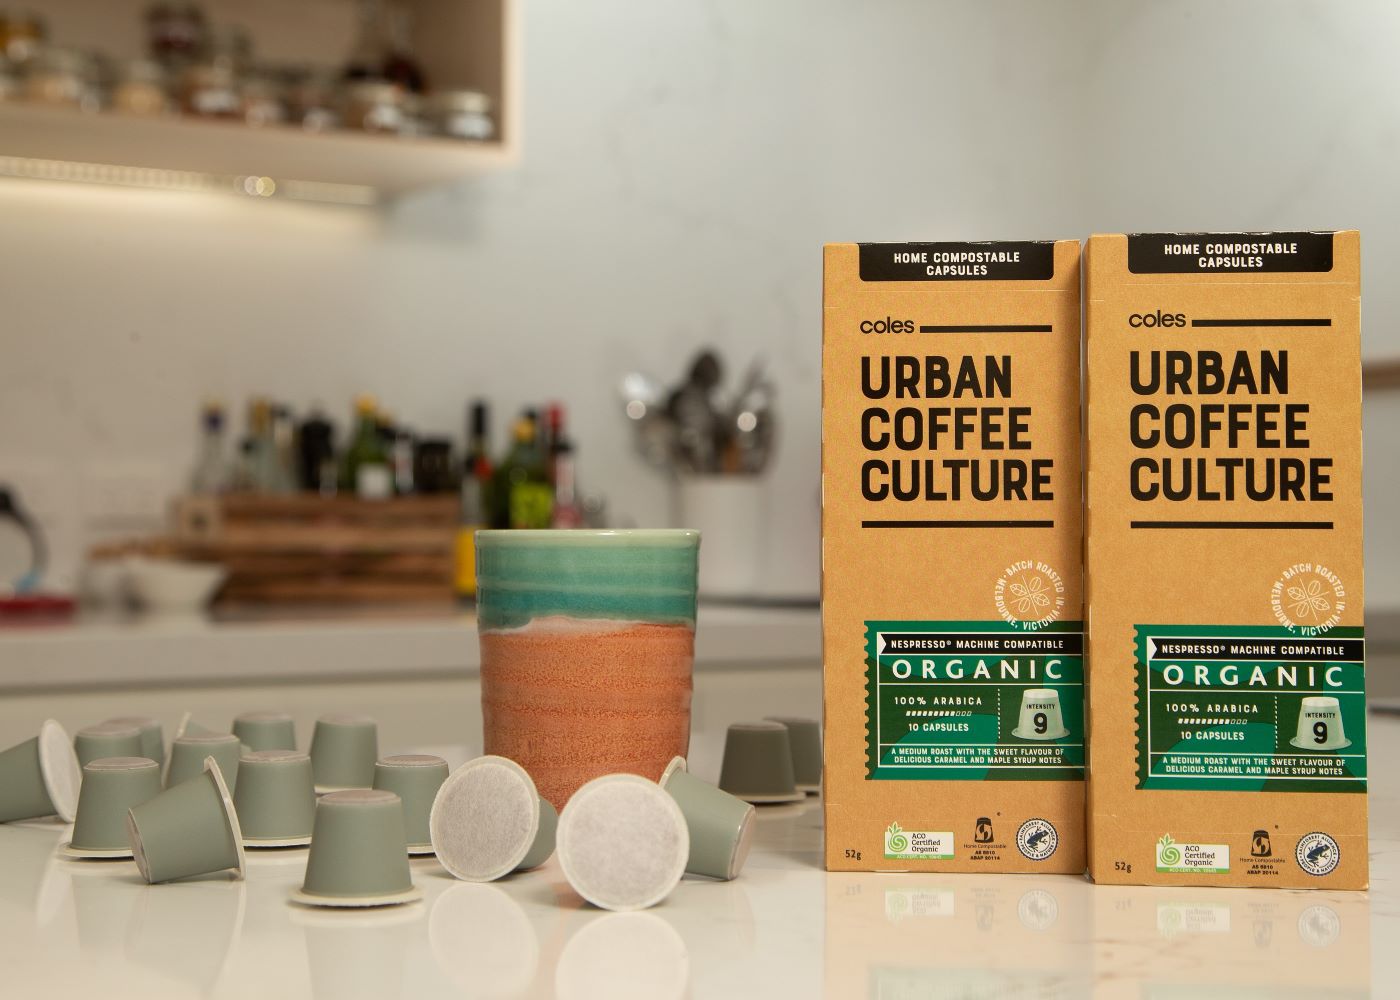 The Coles Urban Coffee Culture Organic Home Compostable Pods, which have been made with  bio-sourced cellulose and vegetable oils, can be composted in home compost bins, where they  break down in about the same amount of time as an orange peel